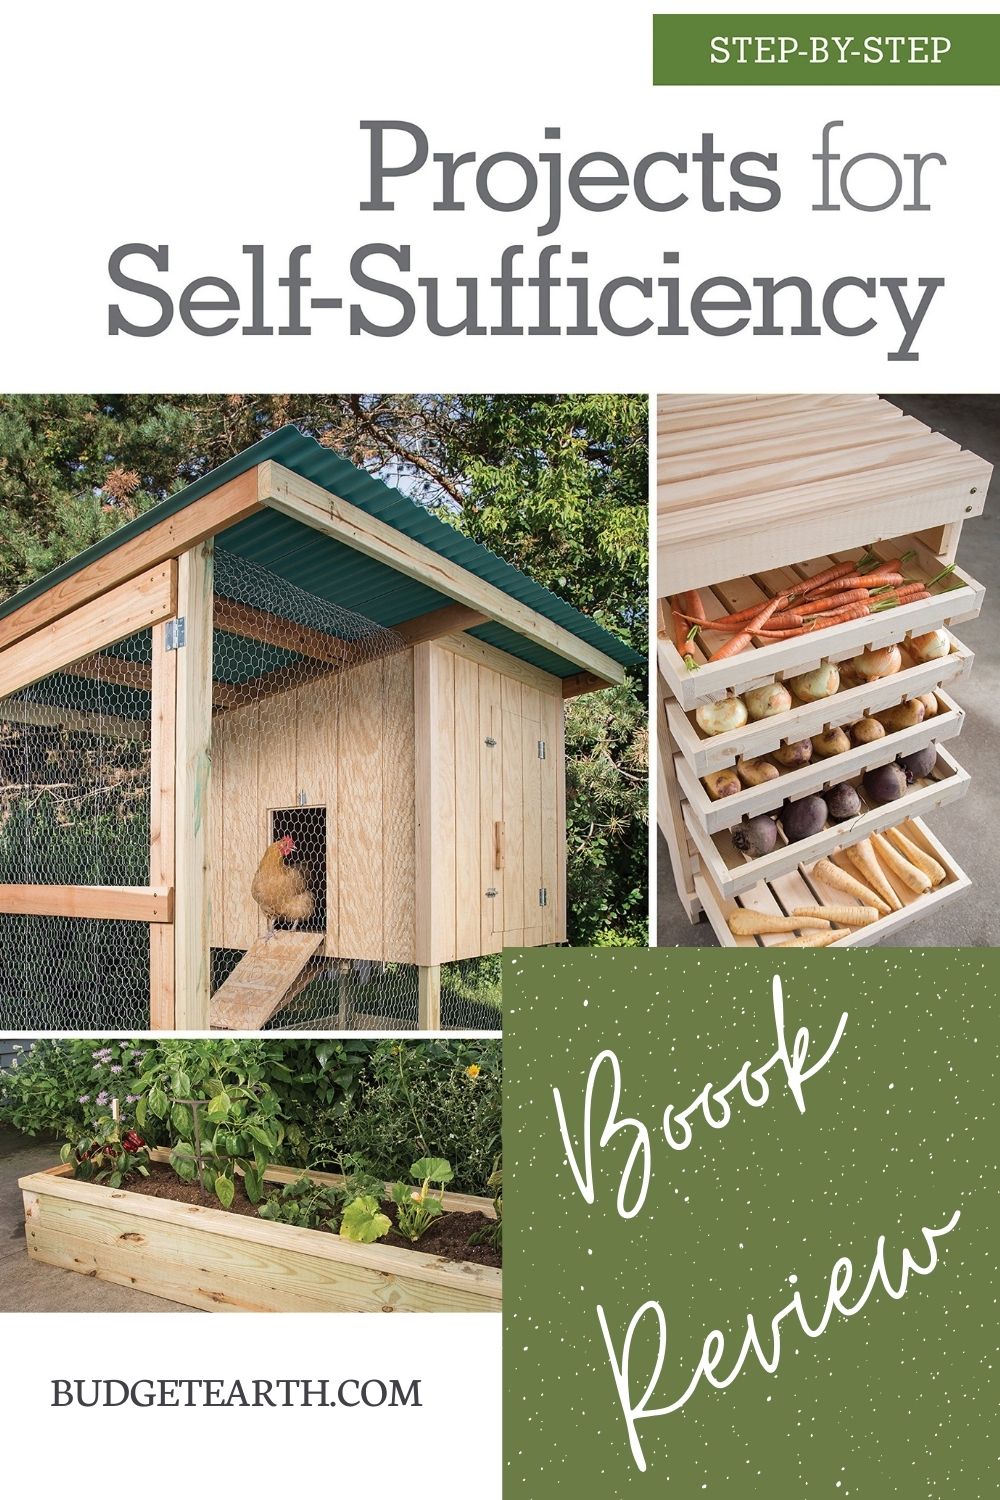 Projects for Self-Sufficiency book cover